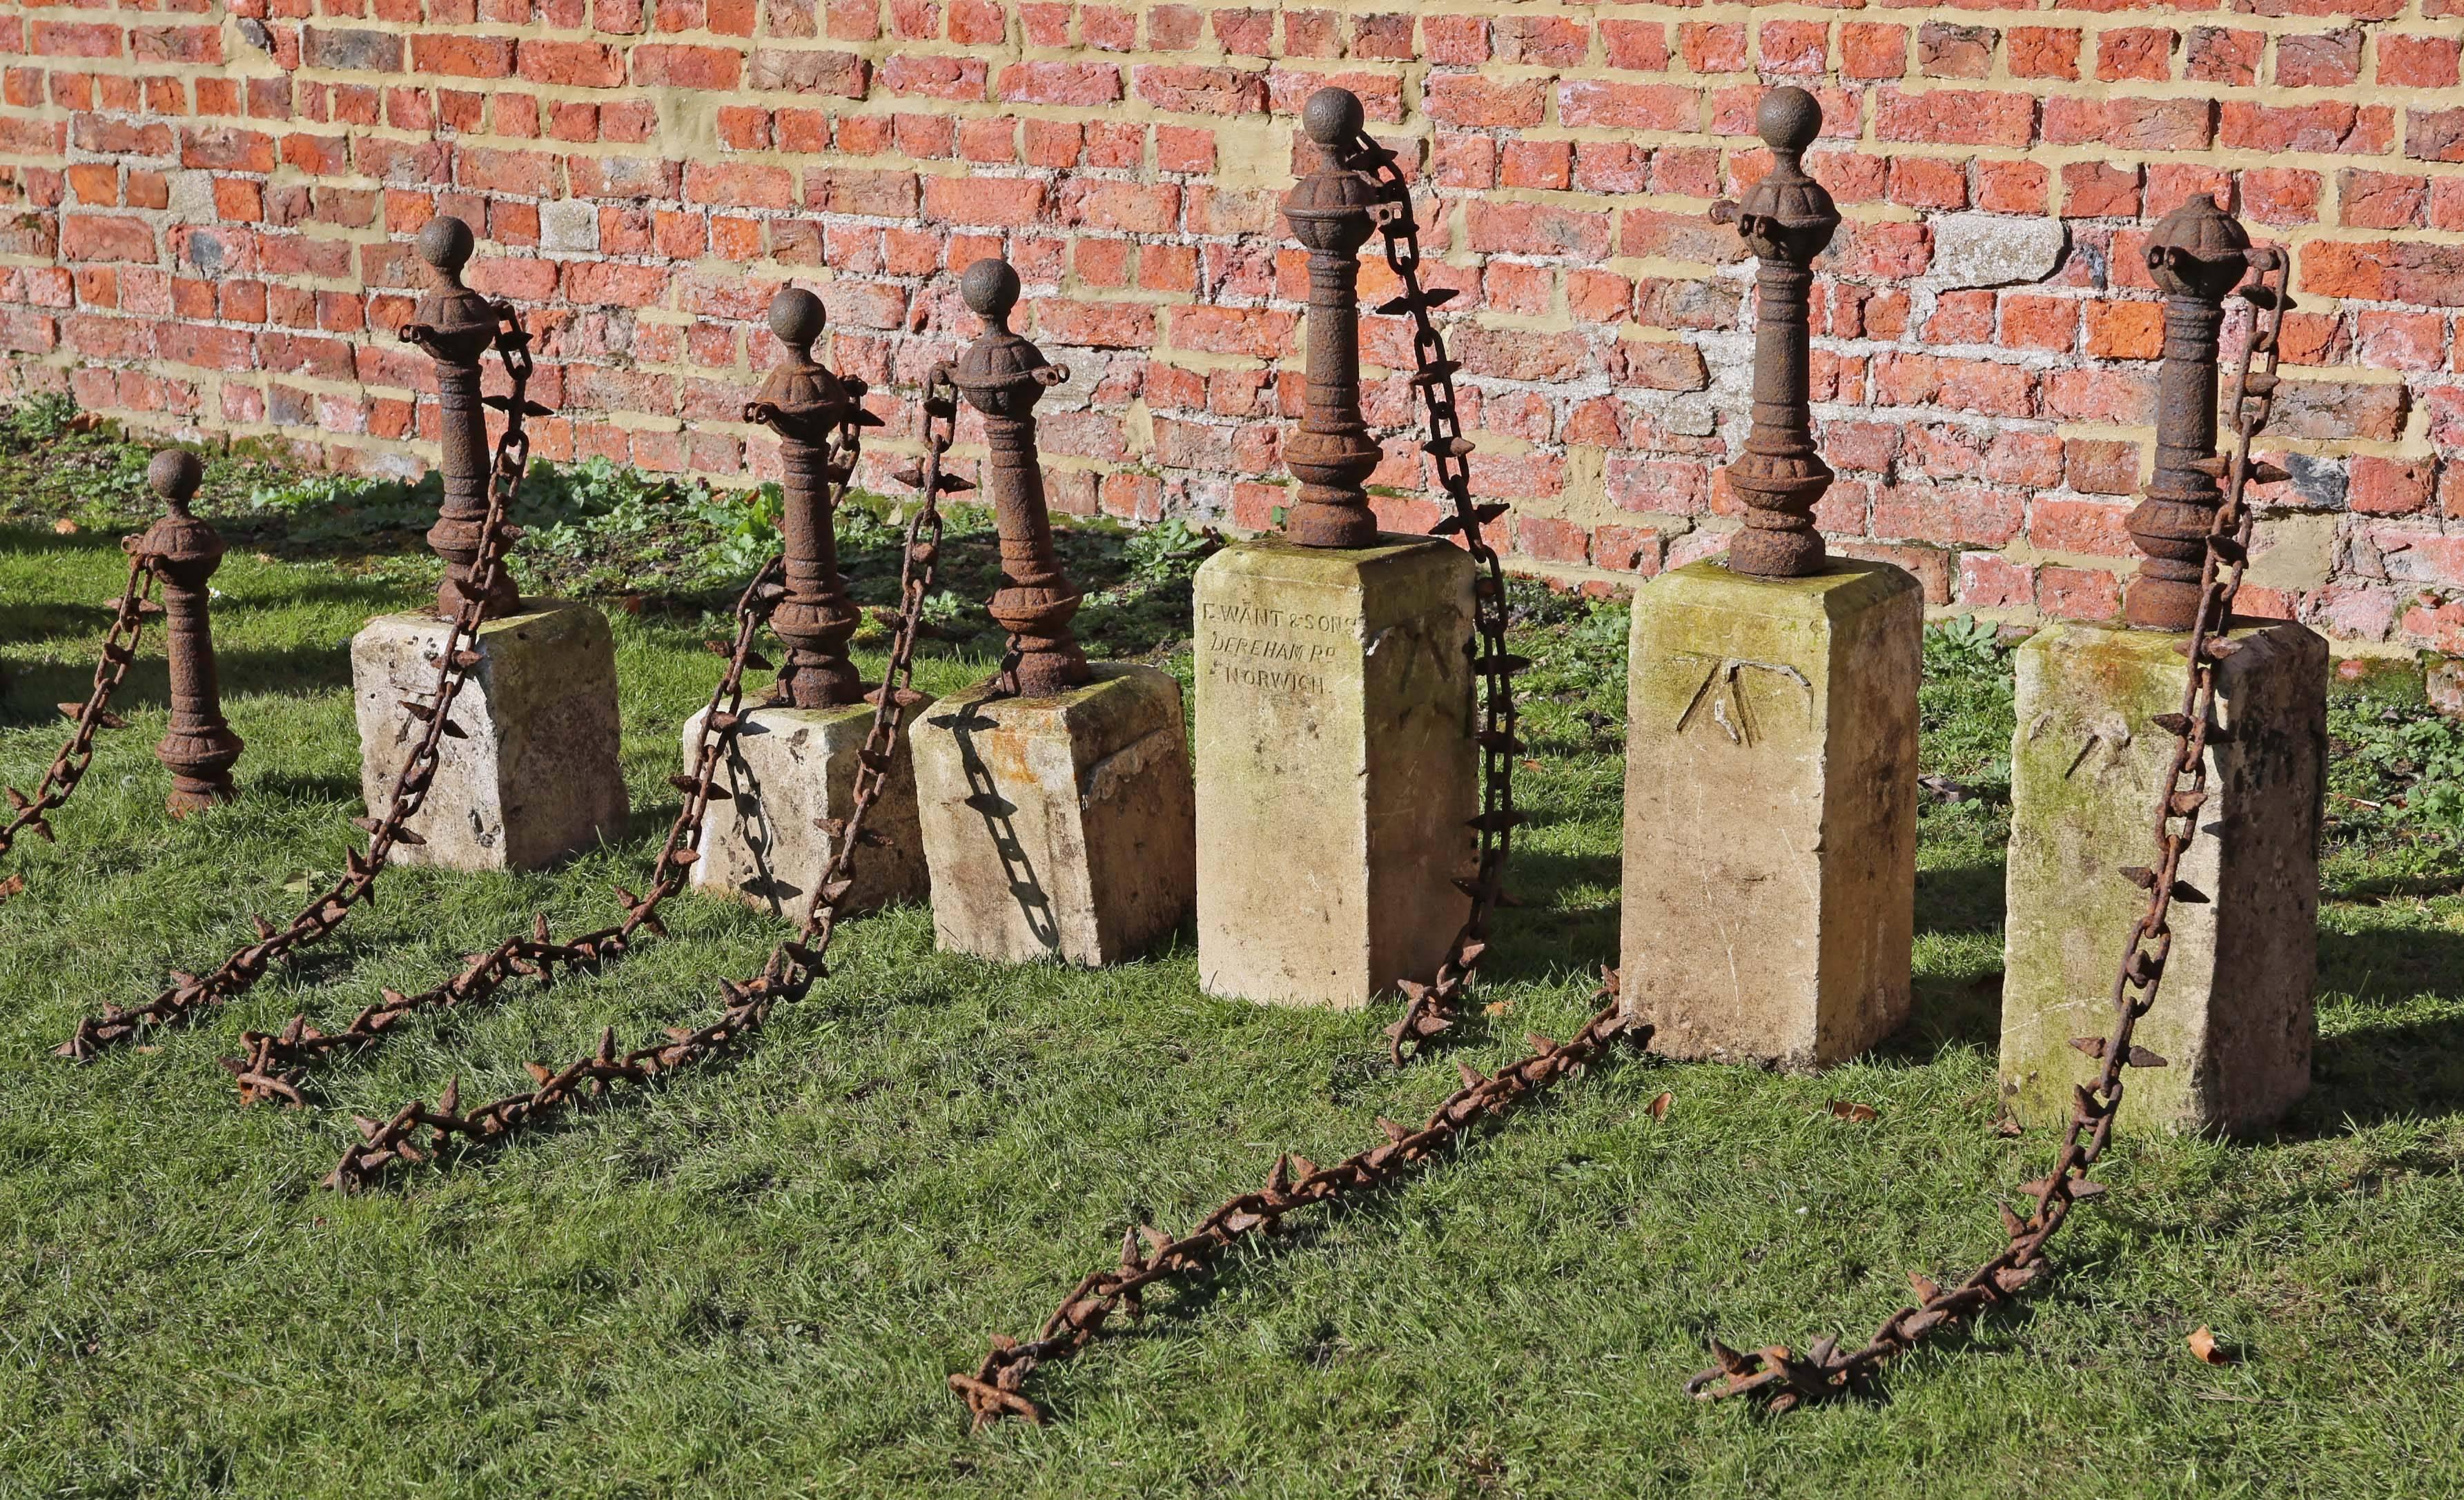 Antique set of seven cast iron bollards with chain and stone bases. Would make great lawn or driveway edging. Around 100 years old.

We have seven bollards (six with stone bases of differing sizes and one without). A little work needed to weld an